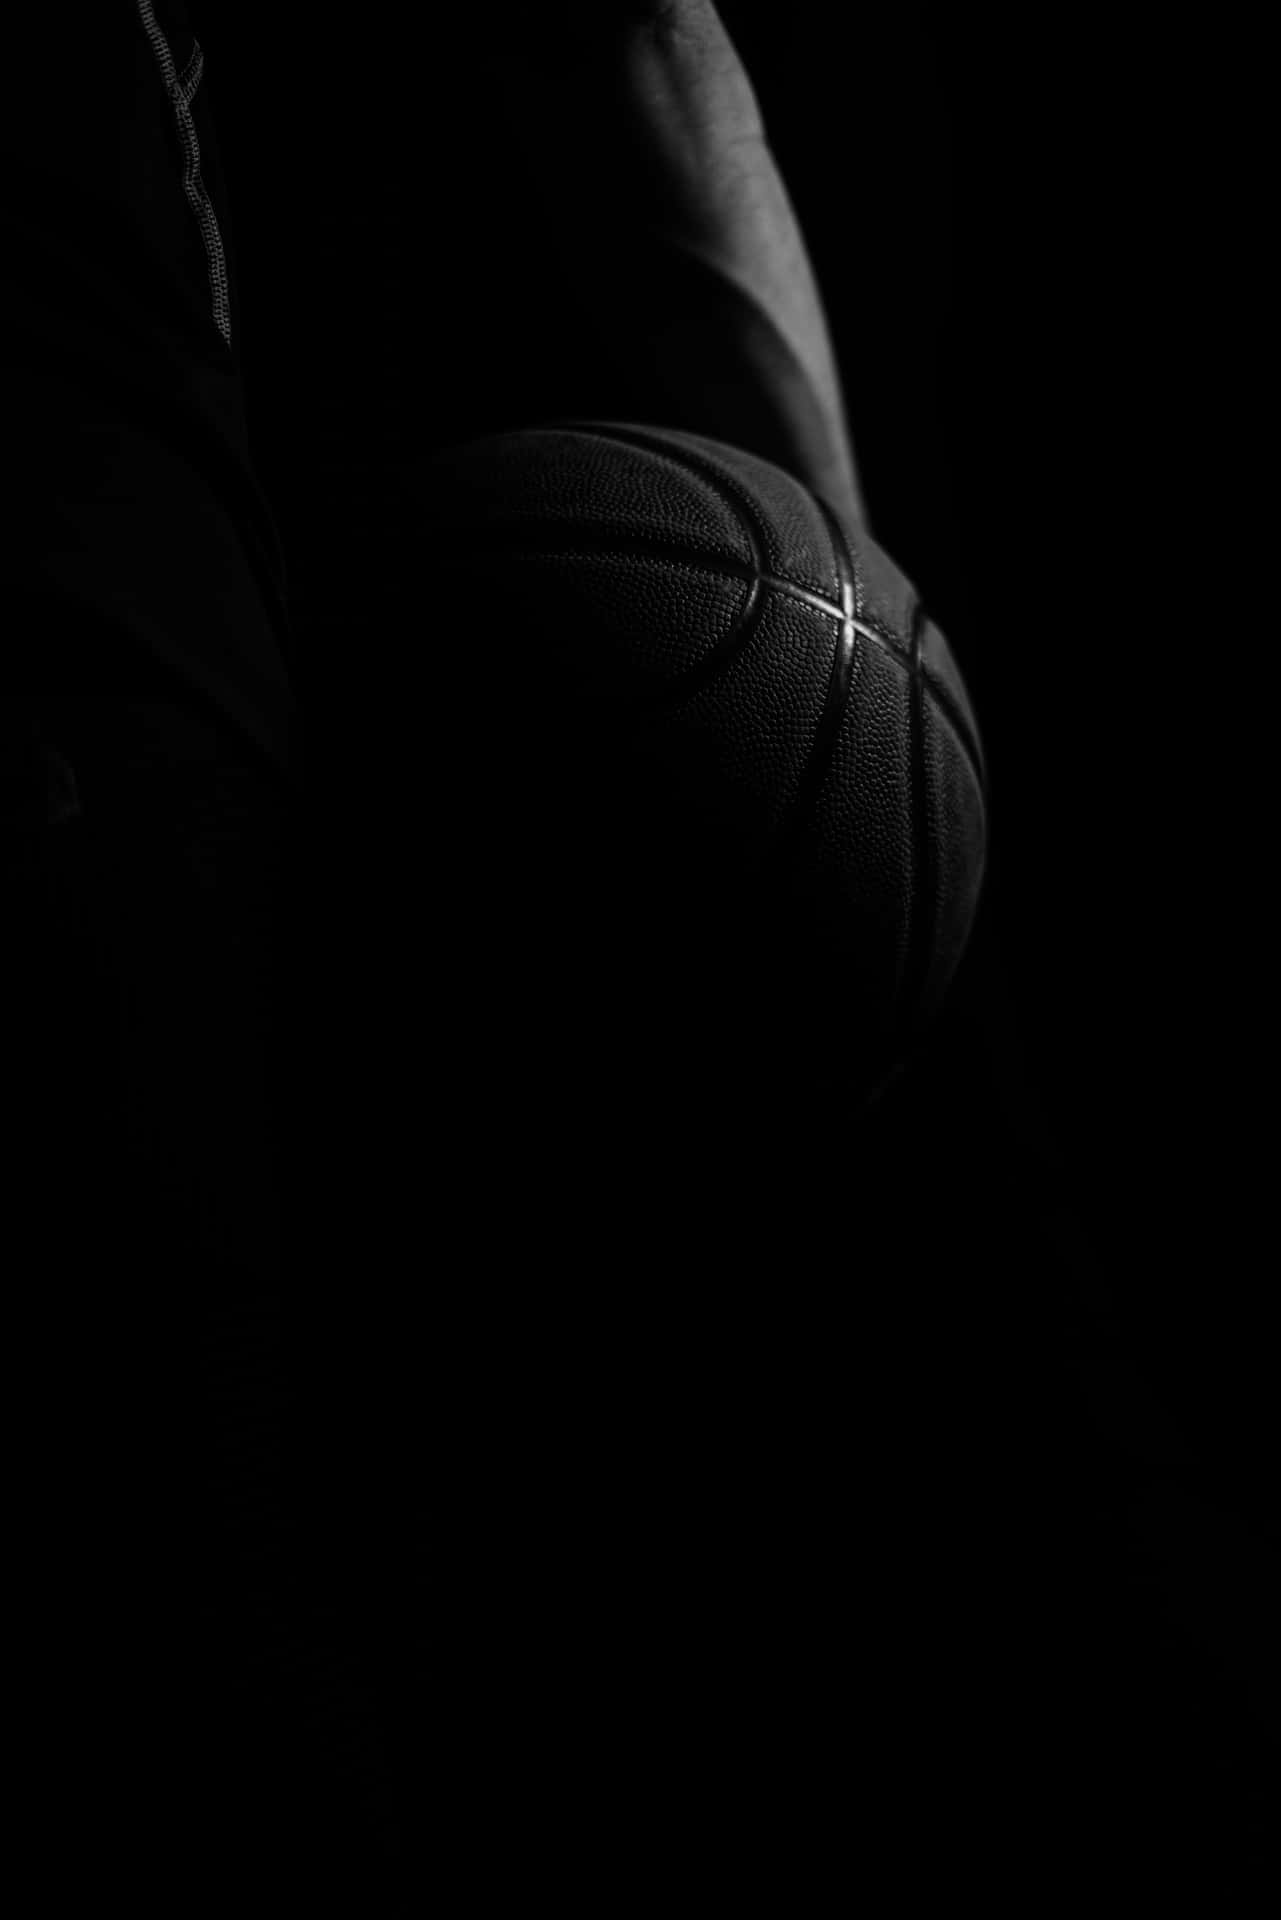 Silhouette Of A Black Basketball